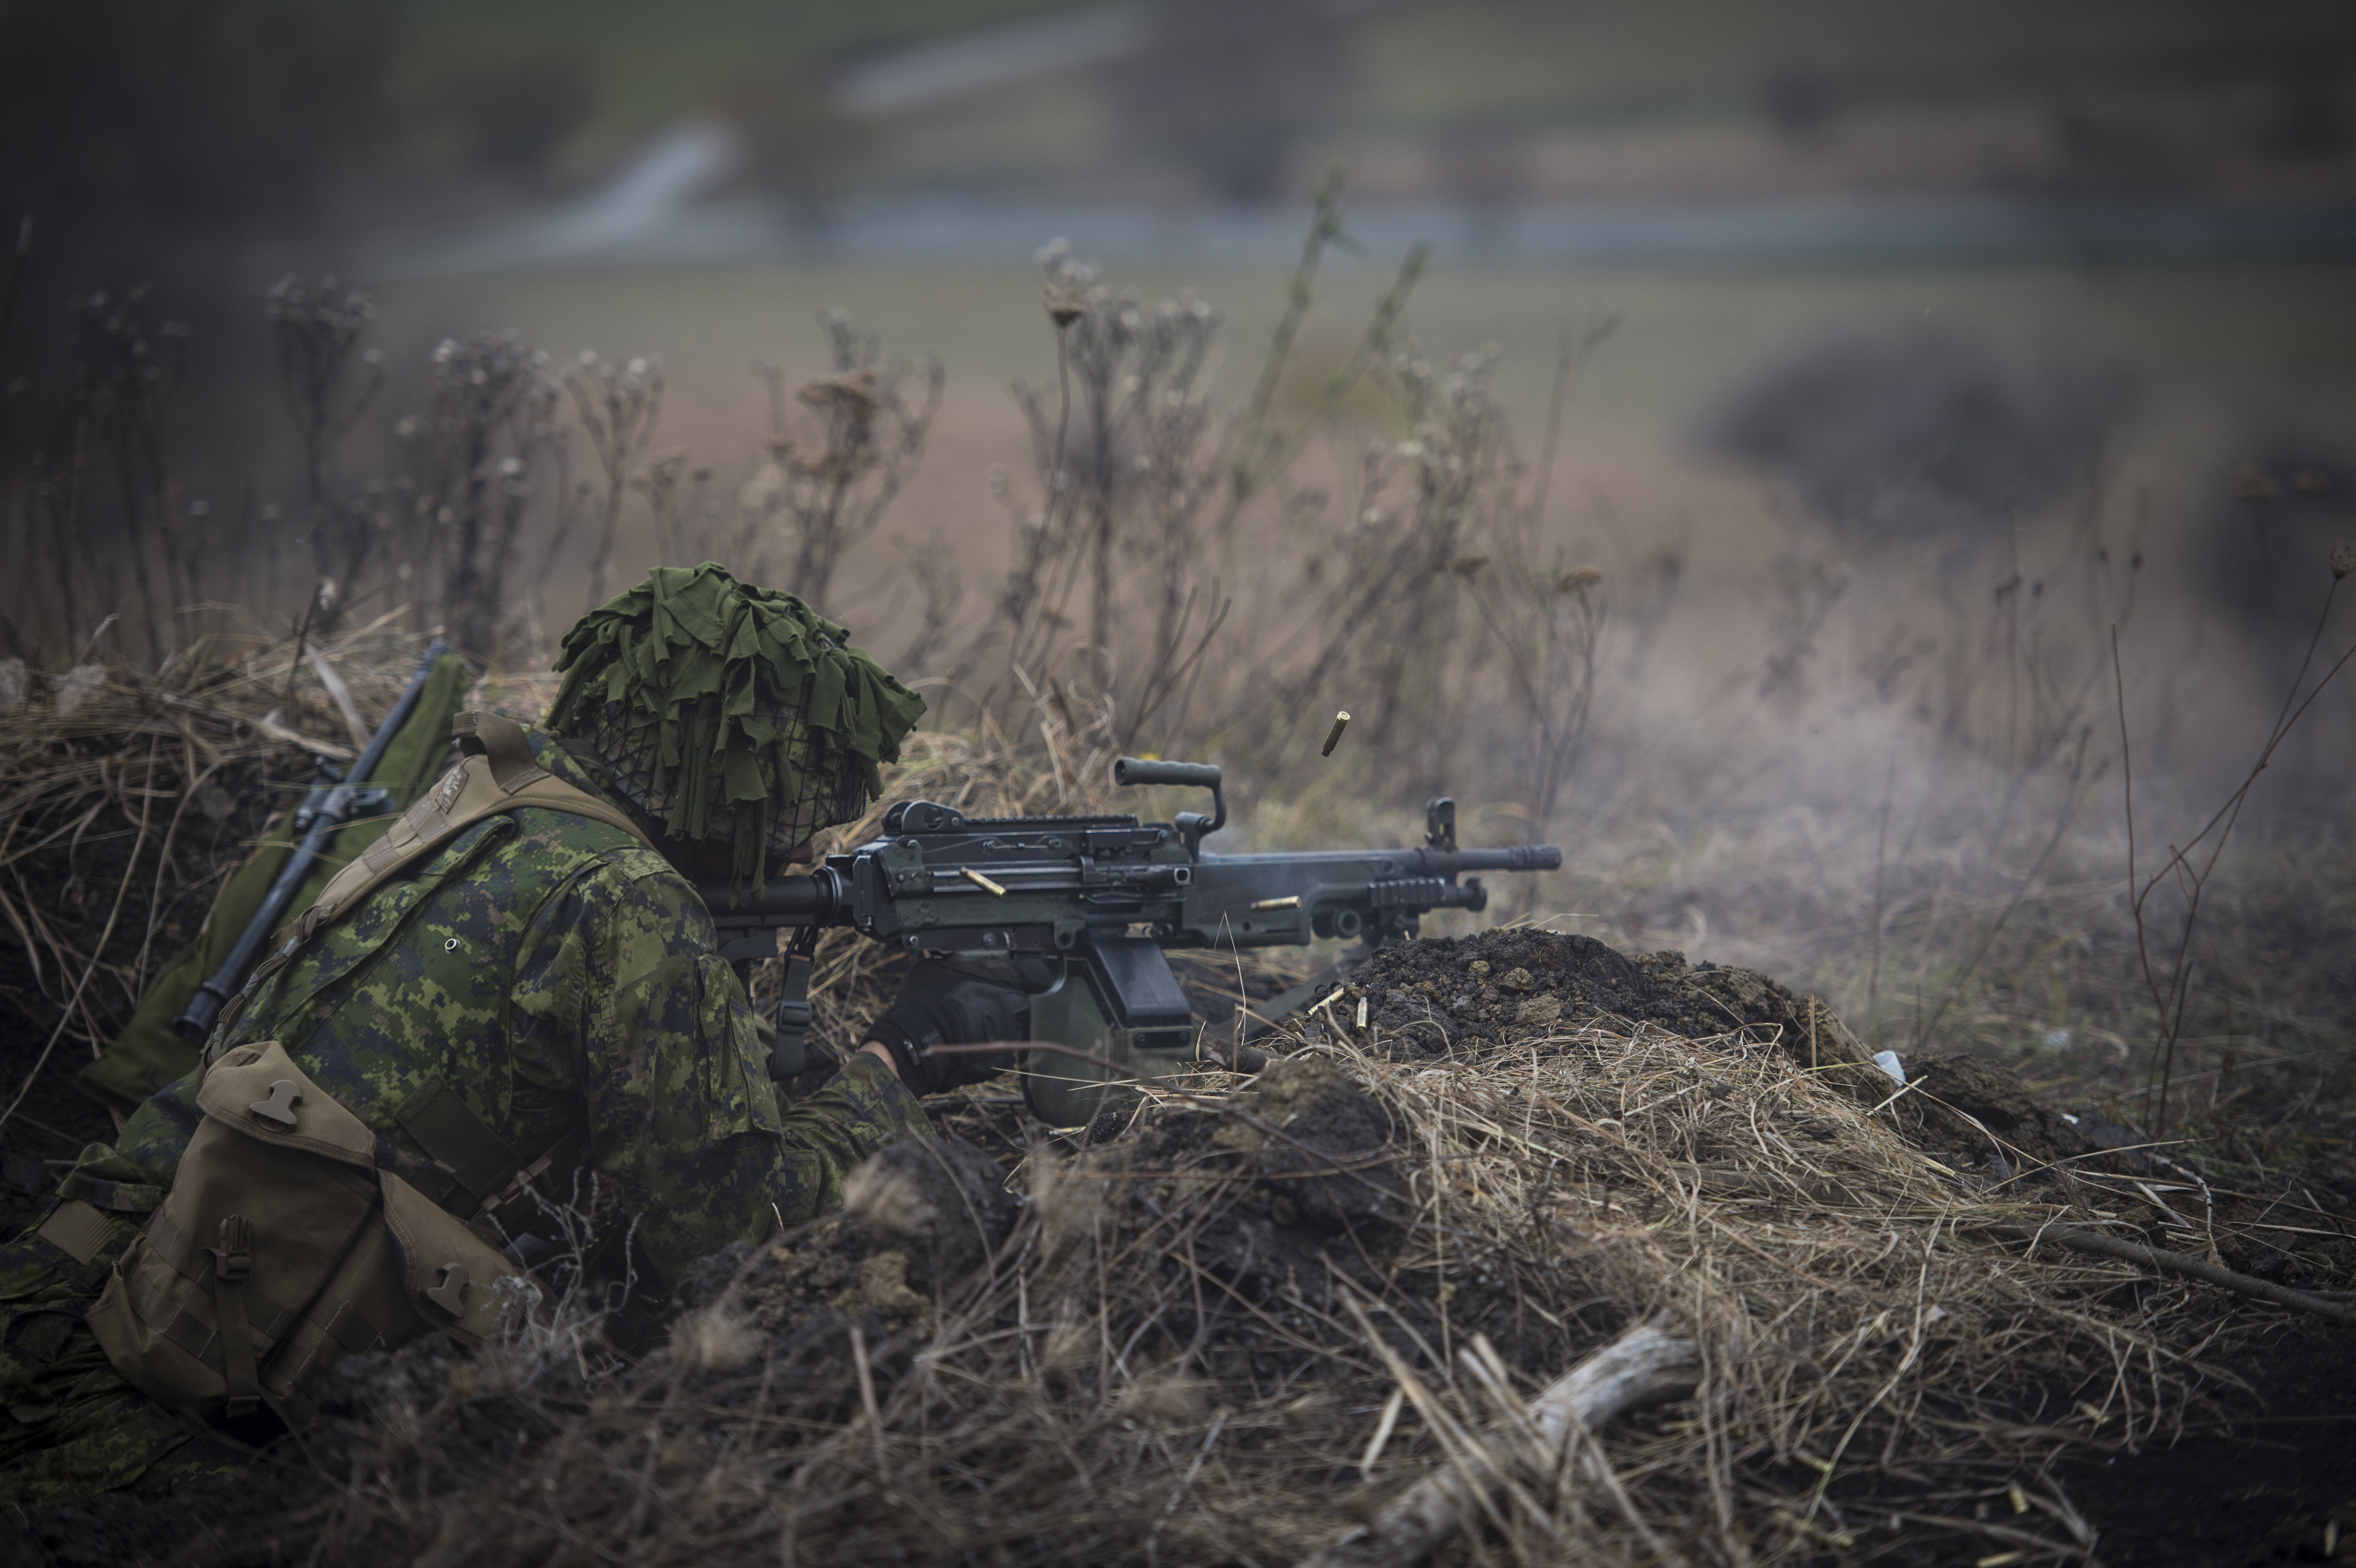 A member of 3 Platoon, Alpha Company, 1 Princess Patricia's Canadian Light Infantry (1 PPCLI) engages targets with a C9 Light Machine Gun at Land Forces Combat Training Centre Getica in Romania during Exercise SCORPION FURY as part of Operation REASSURANCE on November 1, 2016. Photo: Cpl Jay Ekin, Operation REASSURANCE Land Task Force Imagery Technician RP006-2016-0034-004